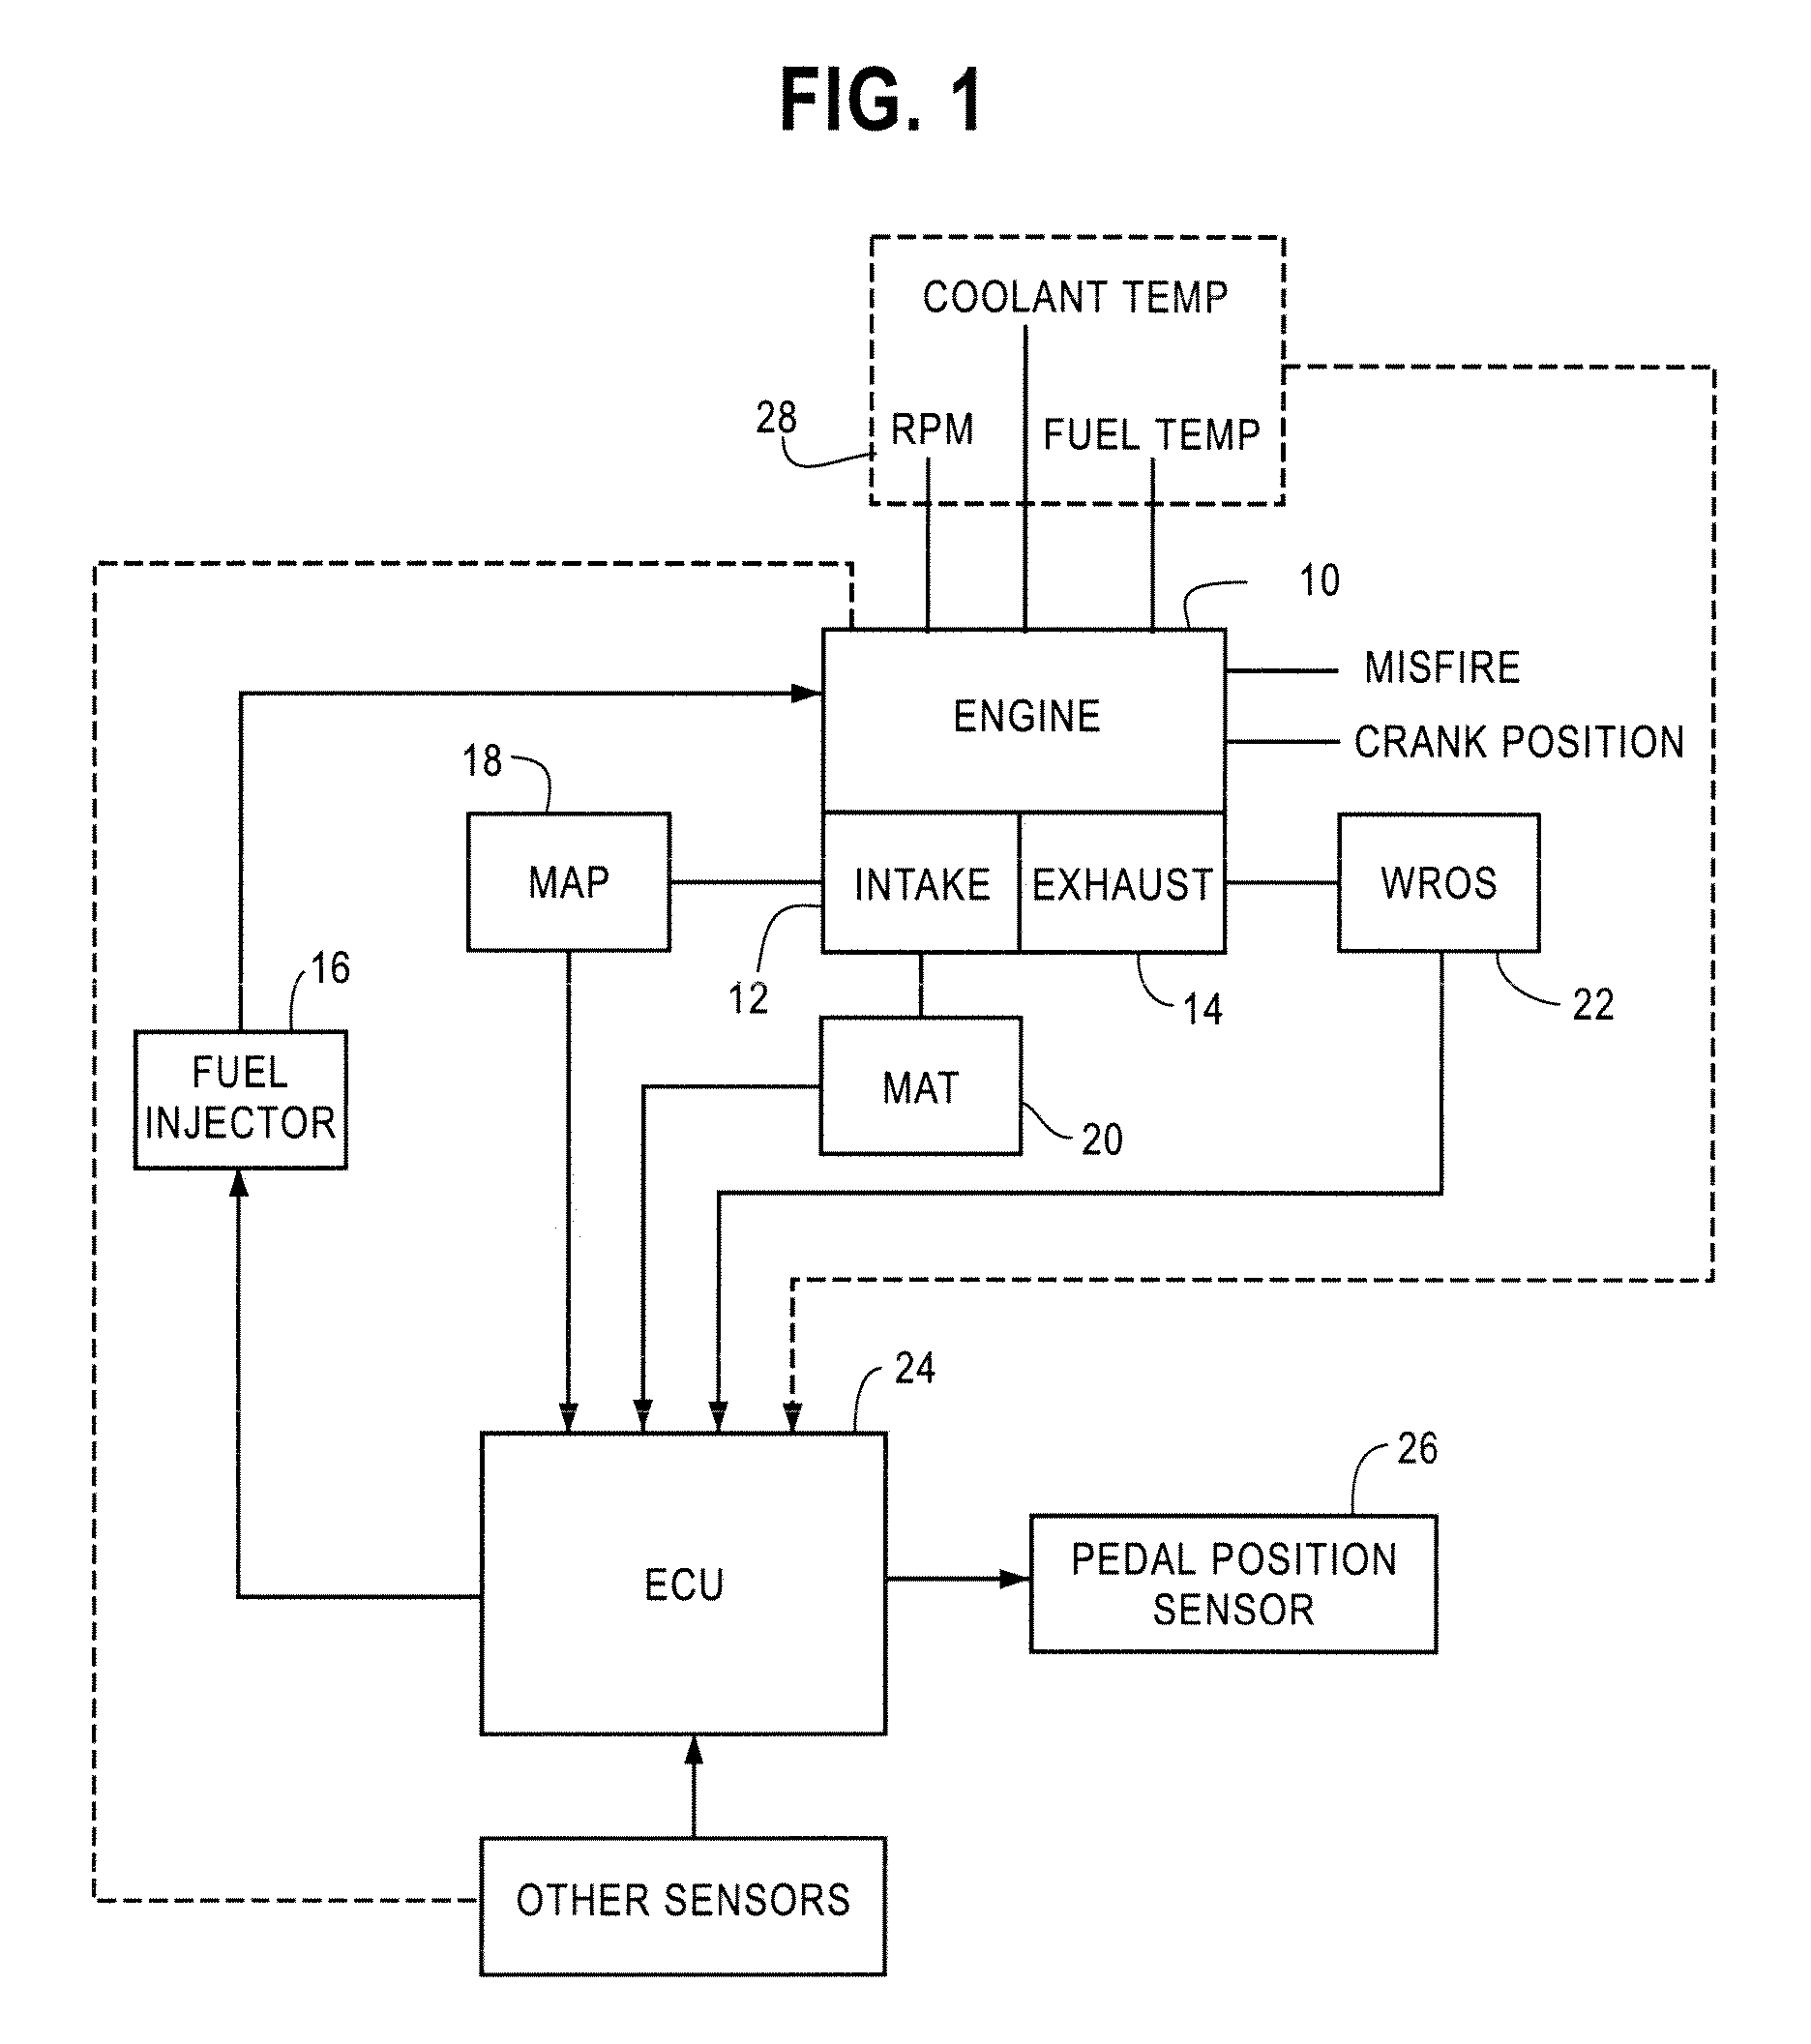 Method and apparatus for controlling an engine capable of operating on more than one type of fuel